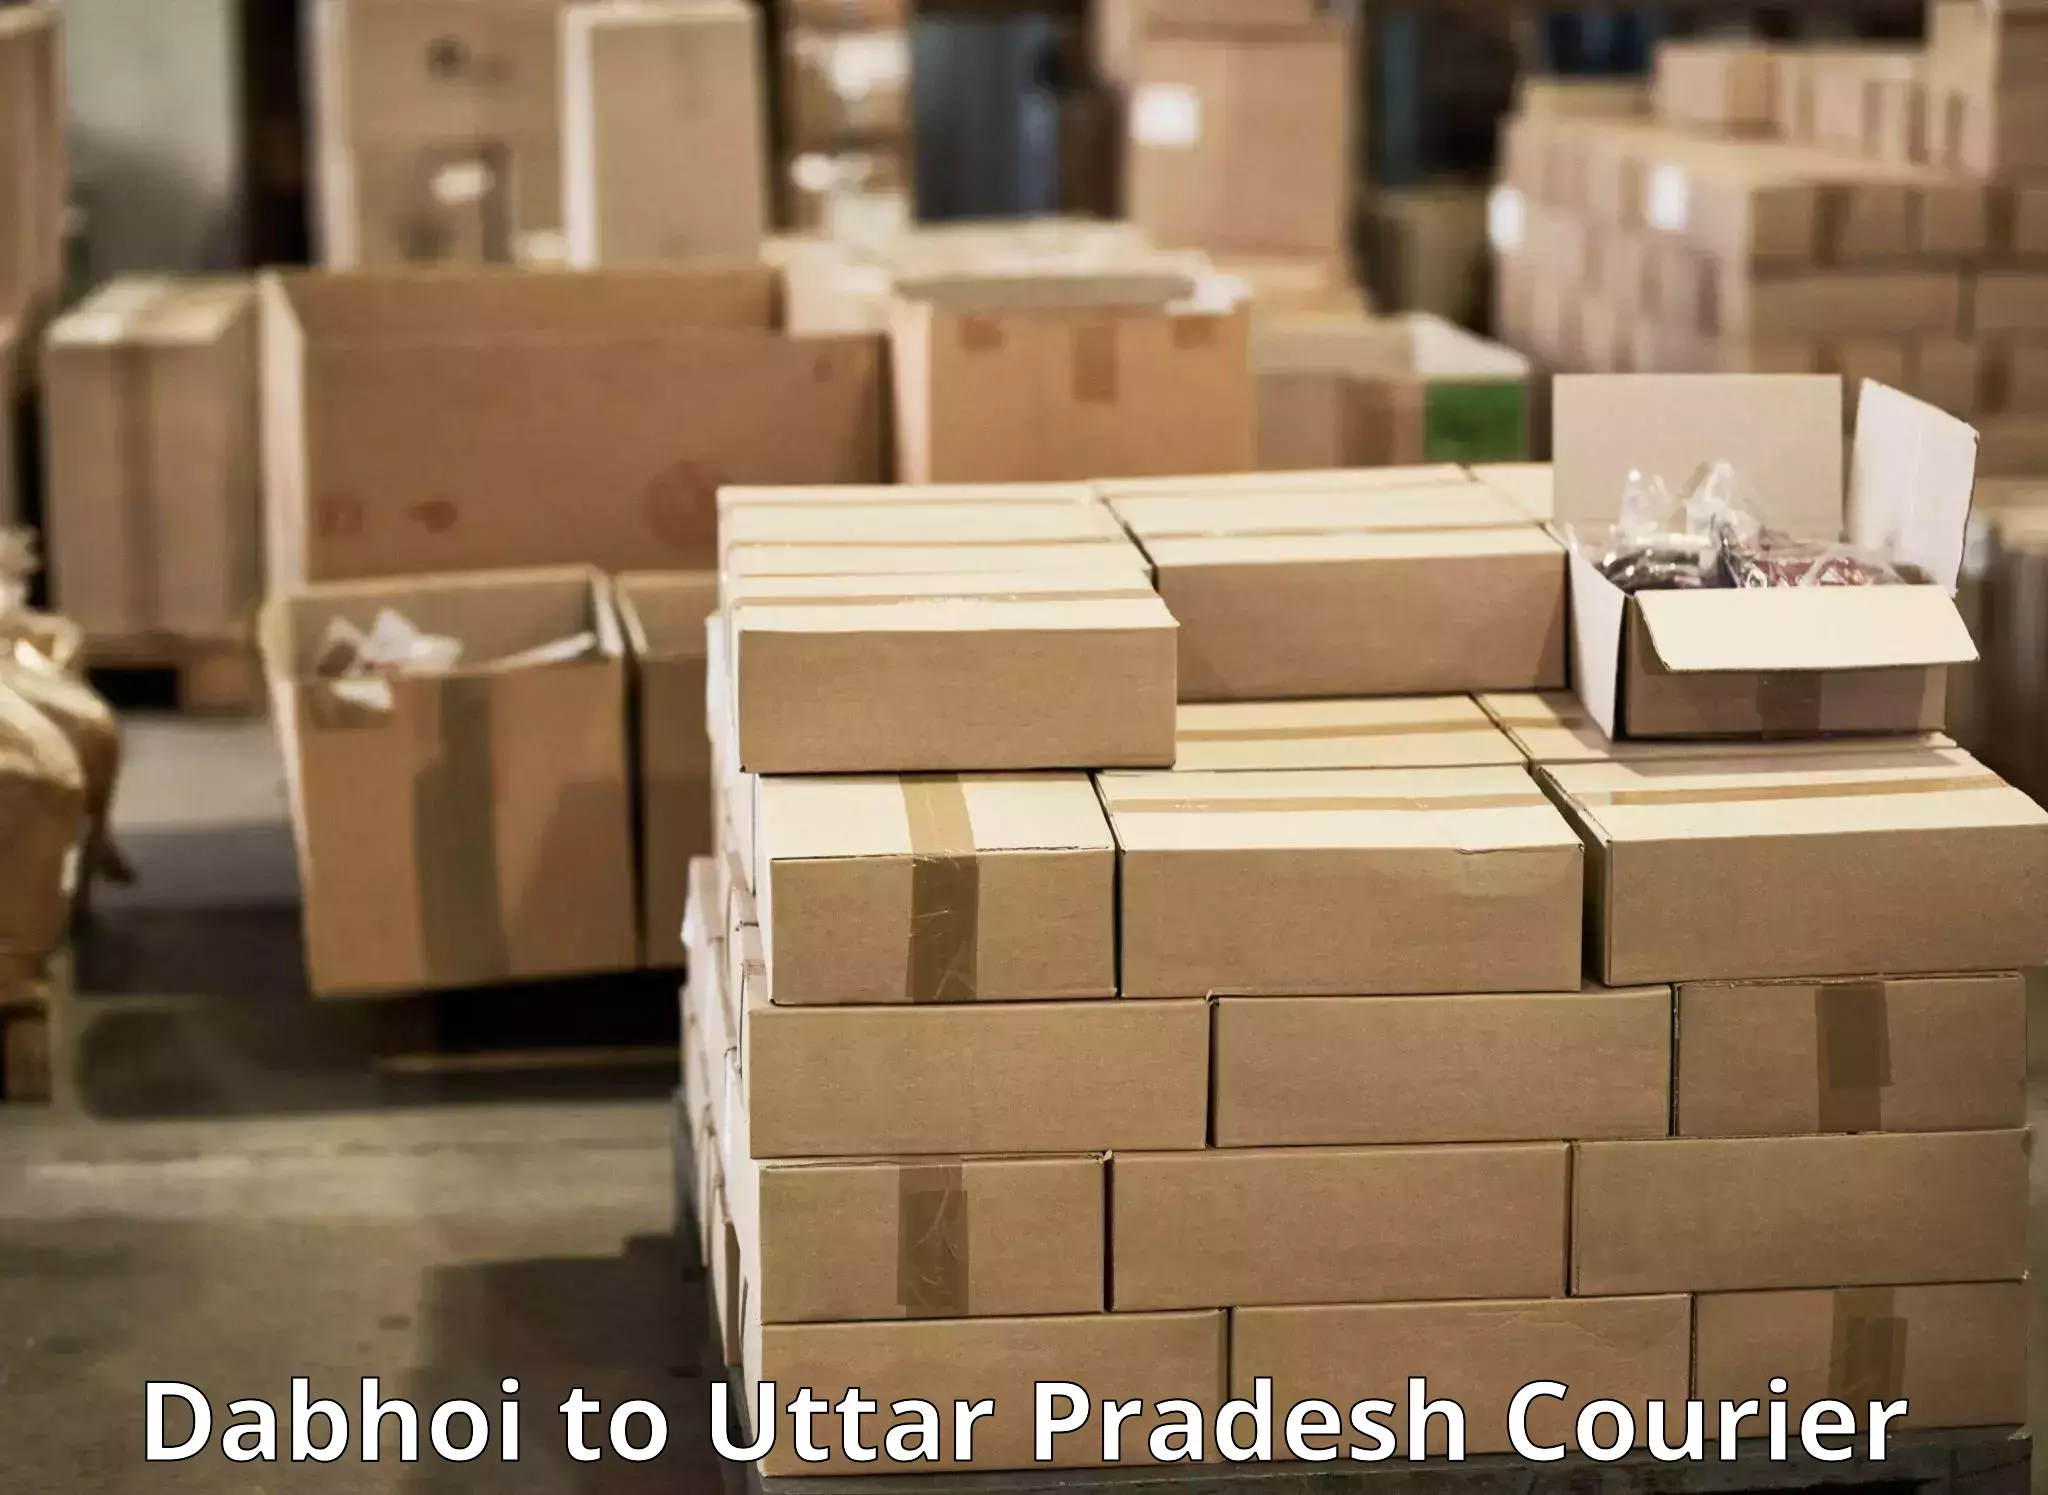 Full-service courier options Dabhoi to Unchahar